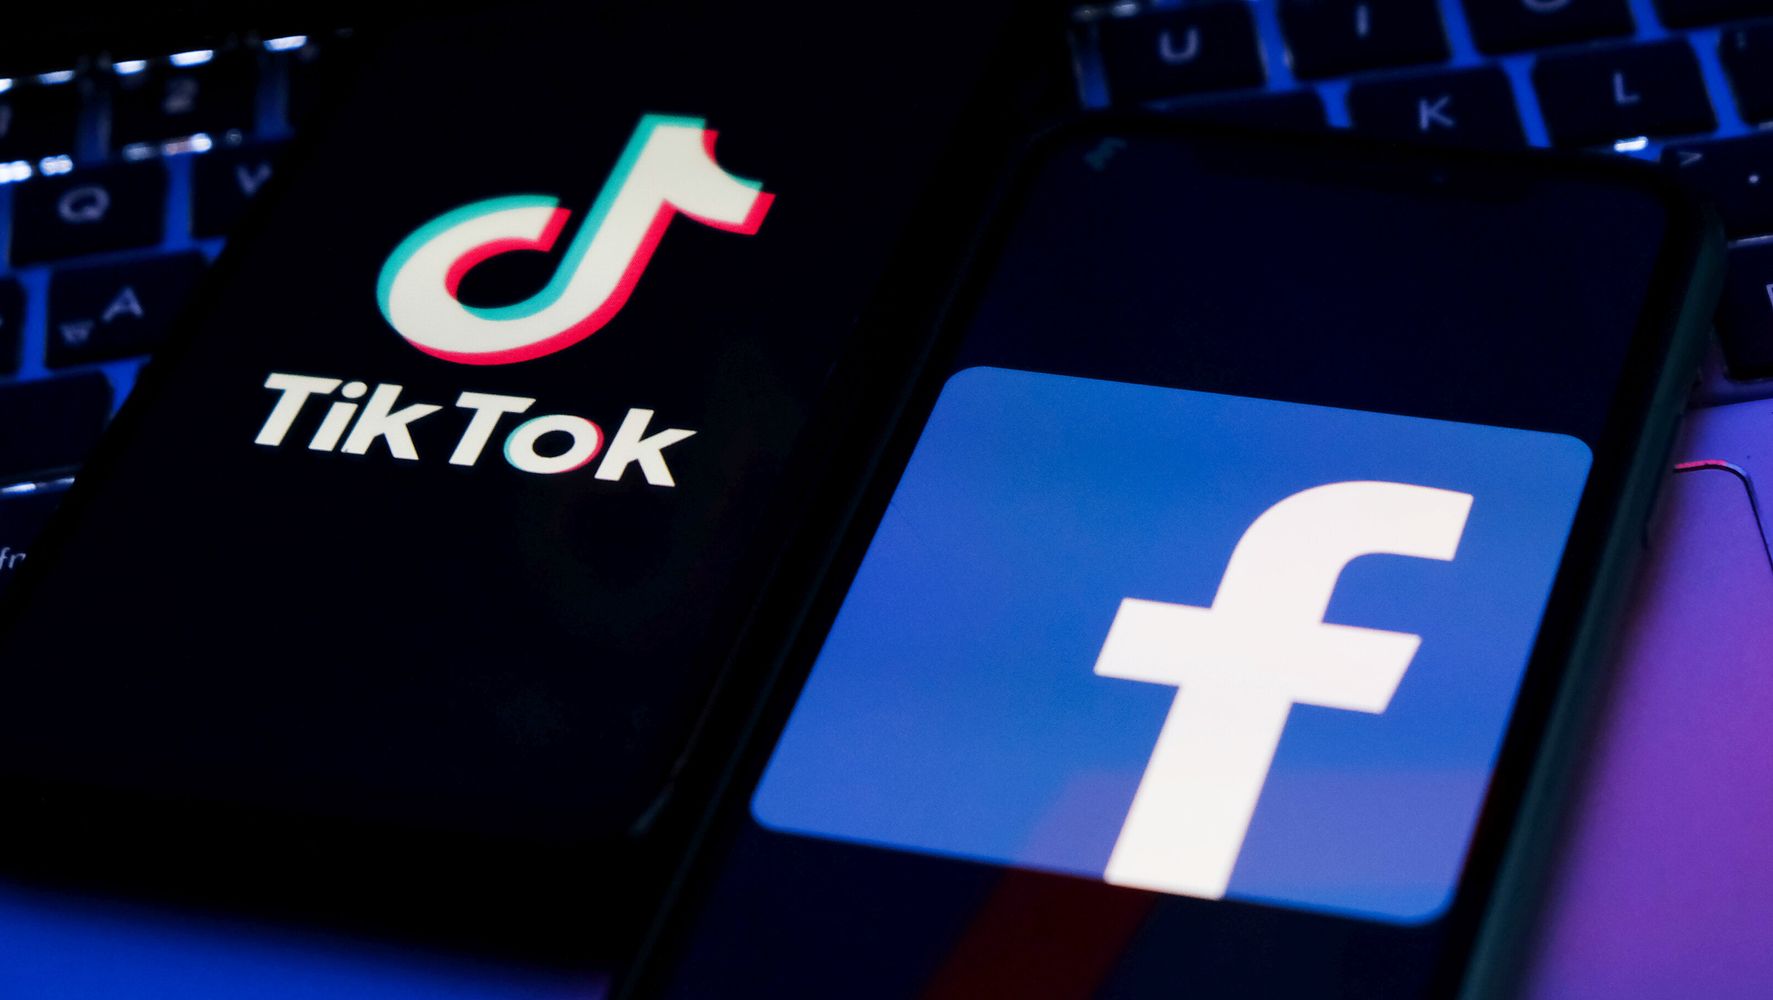 Meta Paid GOP Consultants To Smear TikTok As It Lost Teens, Emails Show